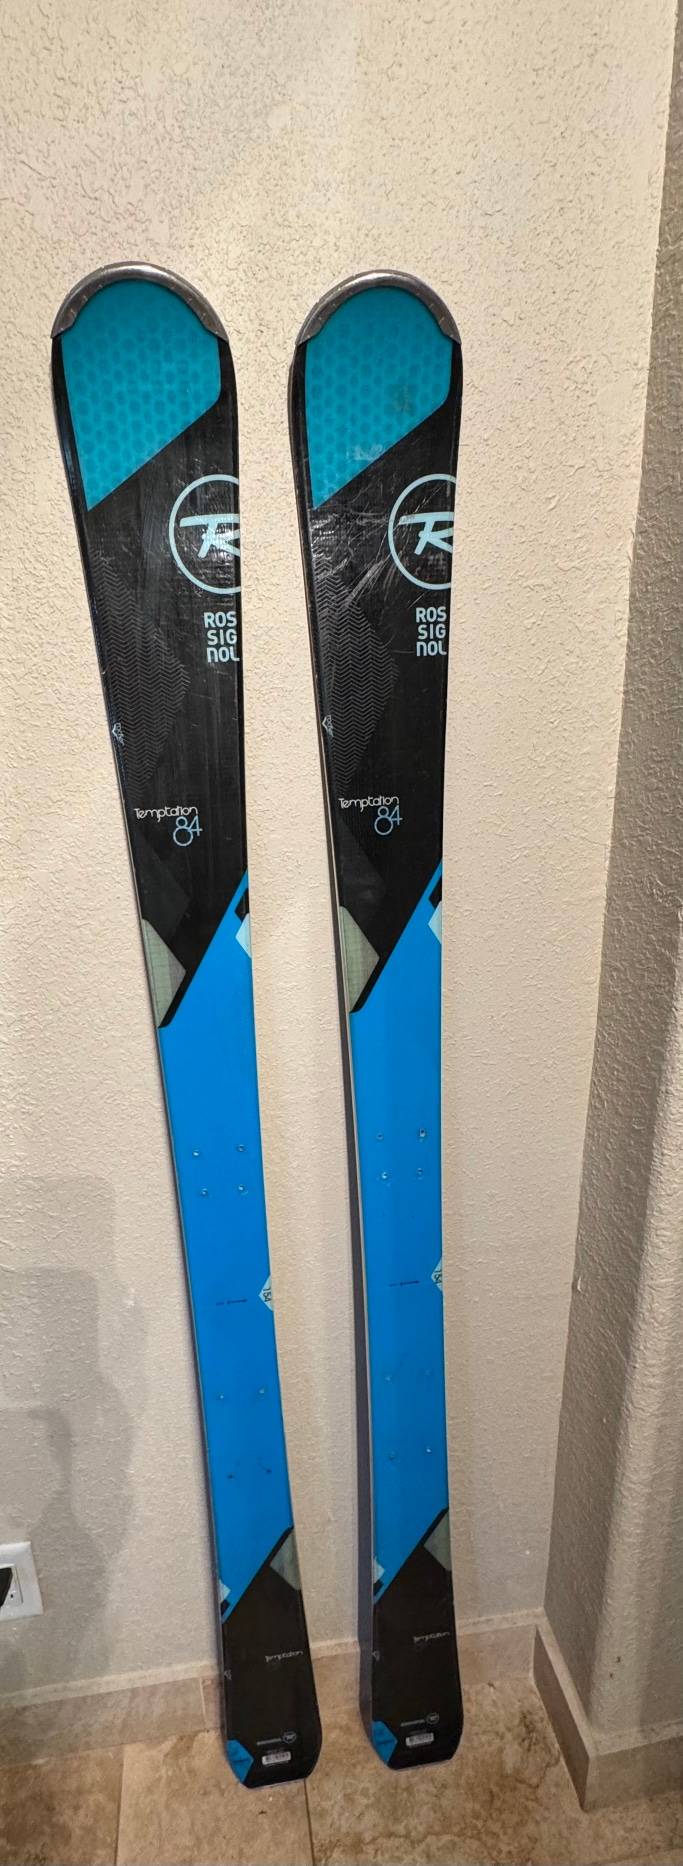 Used Rossignol 154 cm All Mountain Skis with Axium bindings unmounted